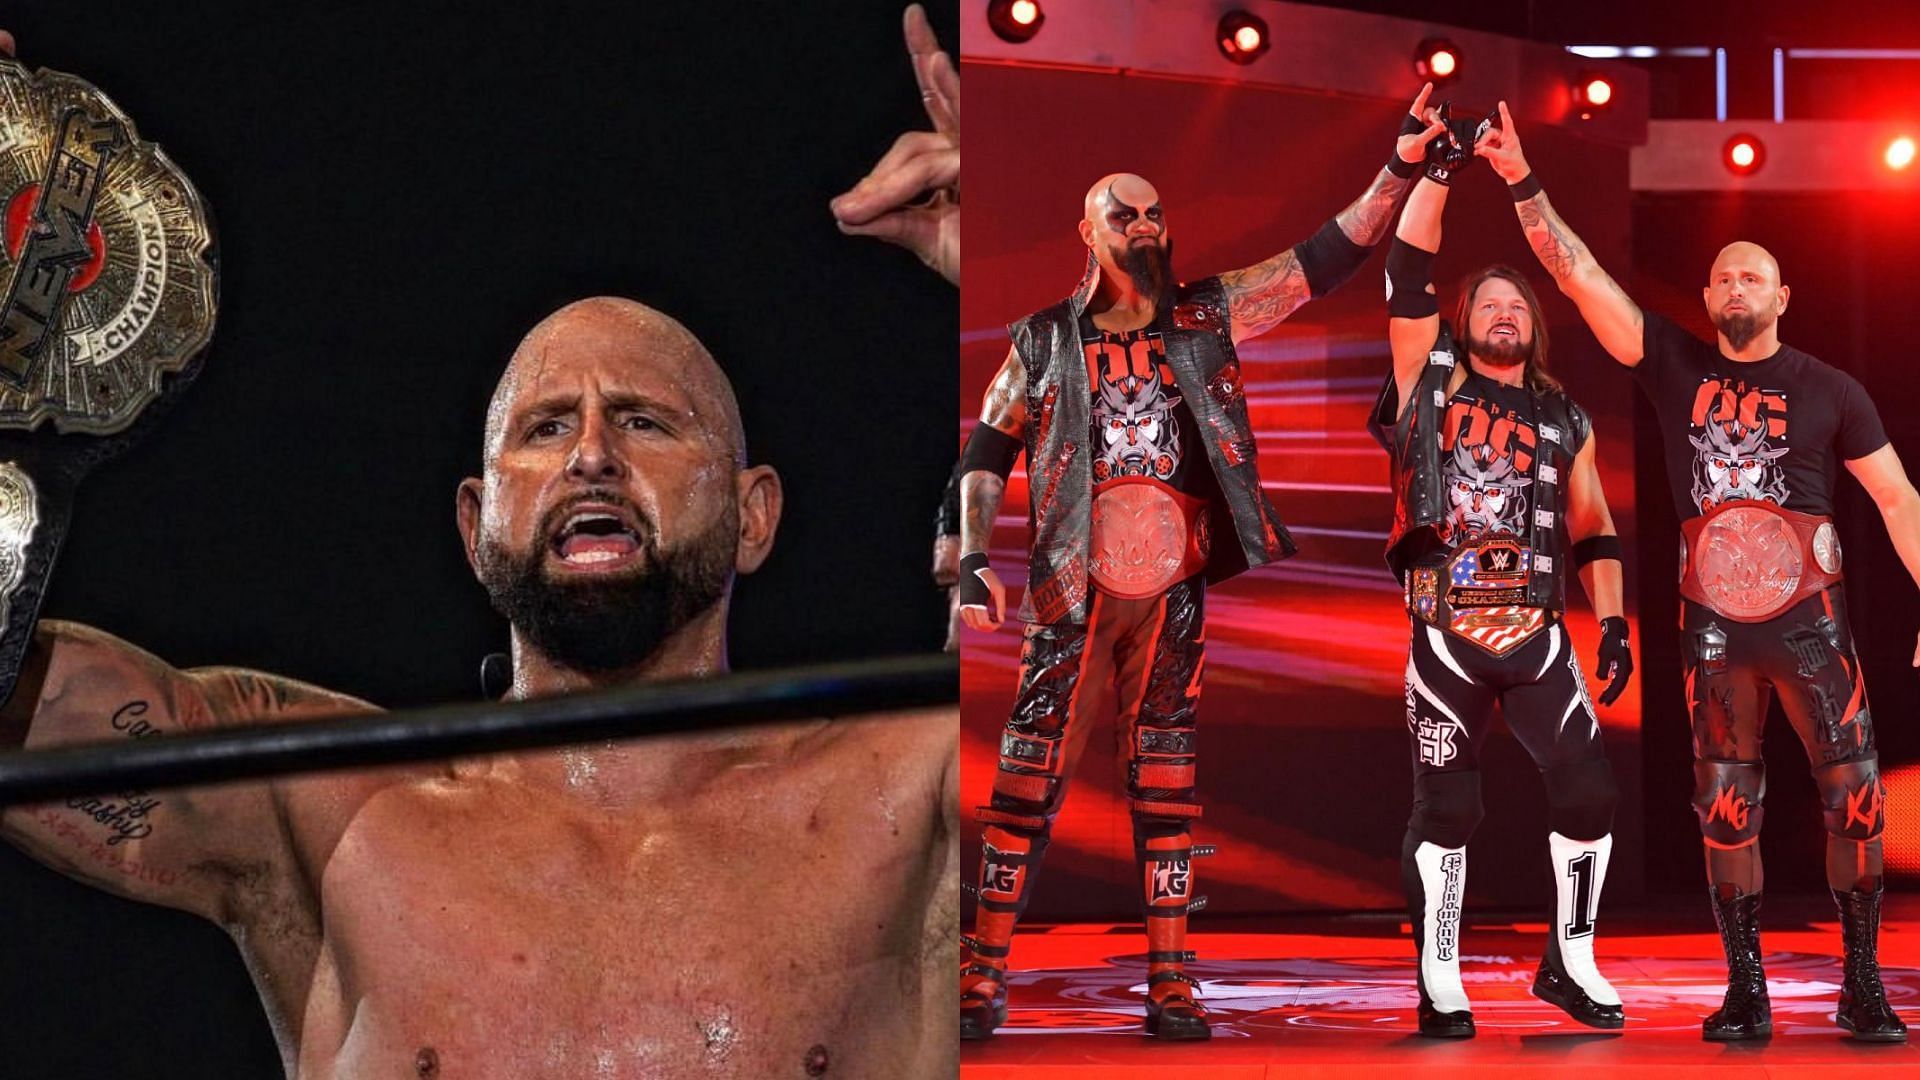 Karl Anderson will appear at Wrestle Kingdom 17